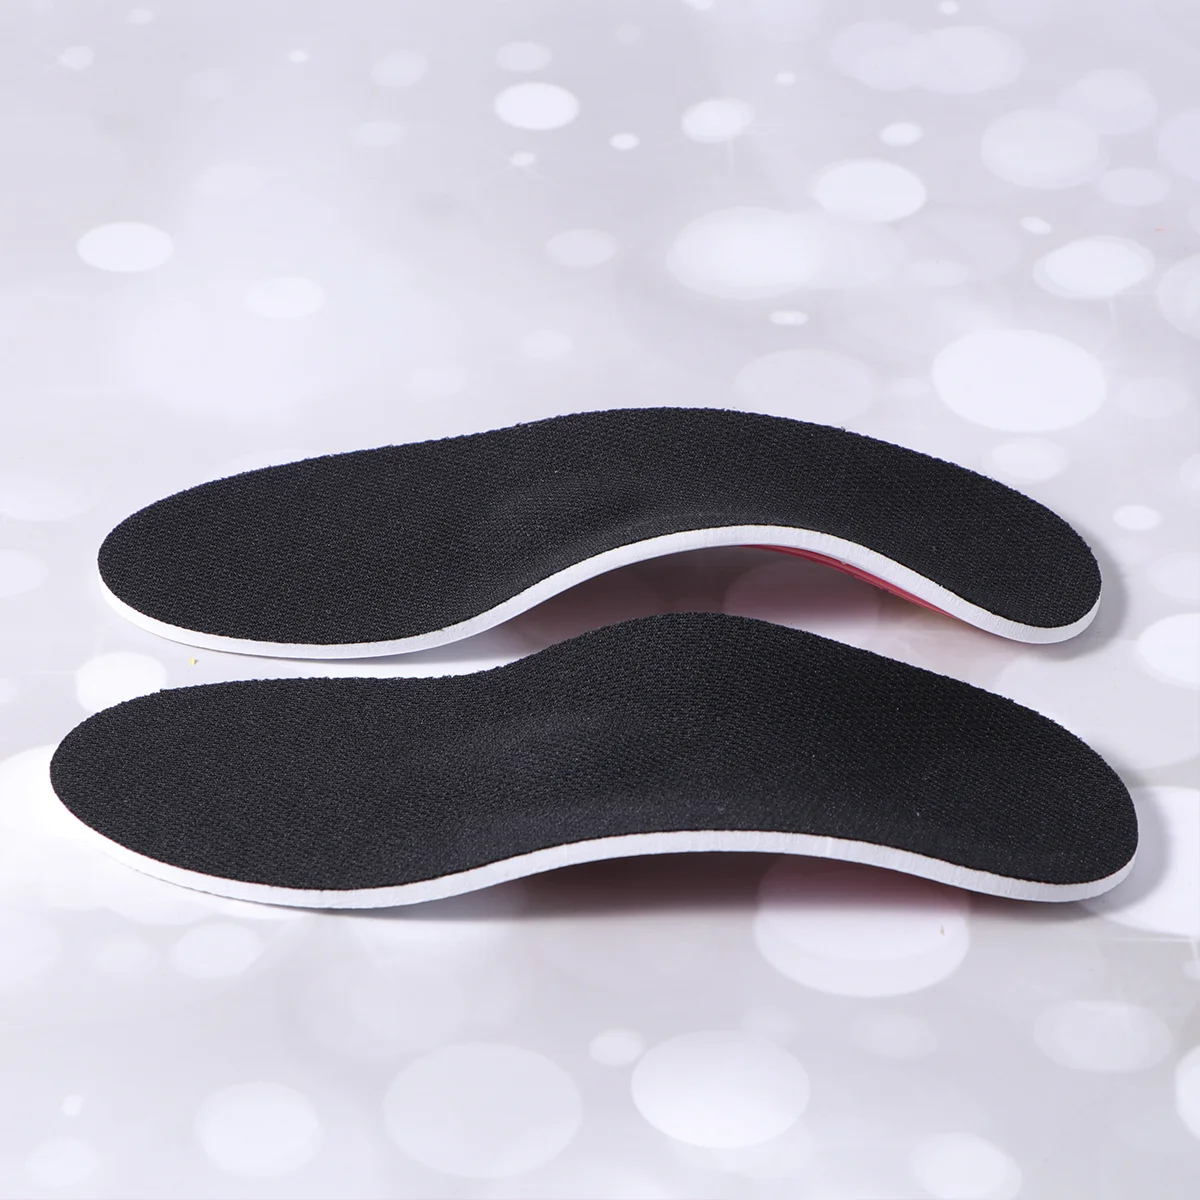 

Arch Insole Support Insoles Orthotic Insert Shoe Highfoot Heel Flat Shoes Cushions Fasciitis Plantar Padinserts Orthopedic